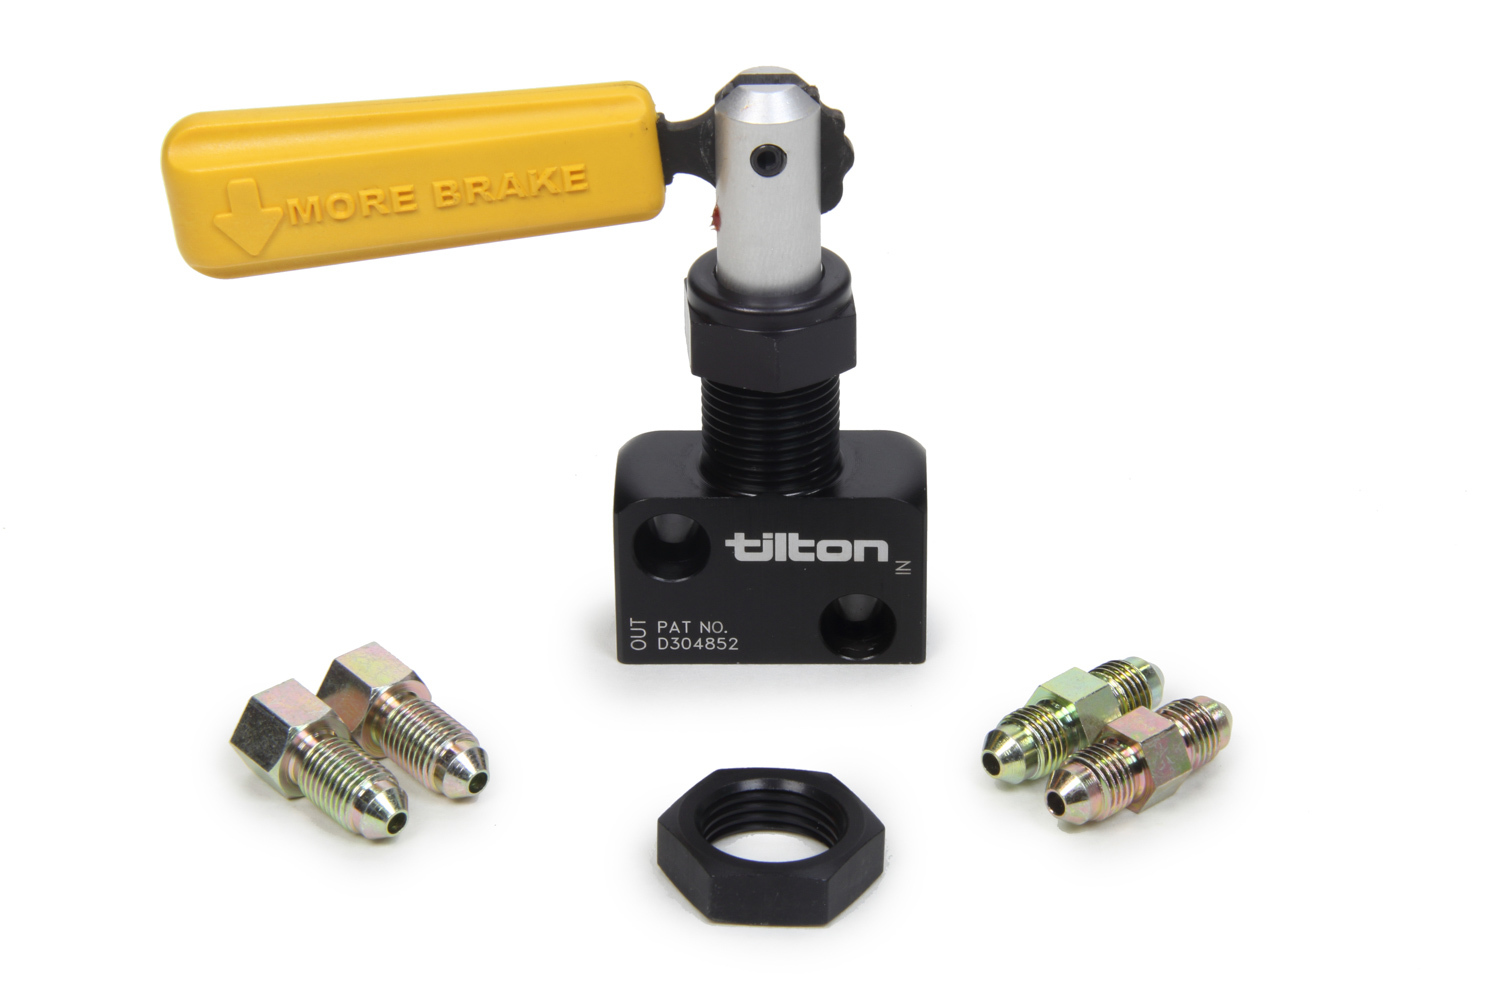 Tilton Engineering 90-1000 - Proportioning Valve, 3 AN Female Inlet, 3 AN Female Outlet, Adjustable 150-1100 psi, Lever Type, Aluminum, Each